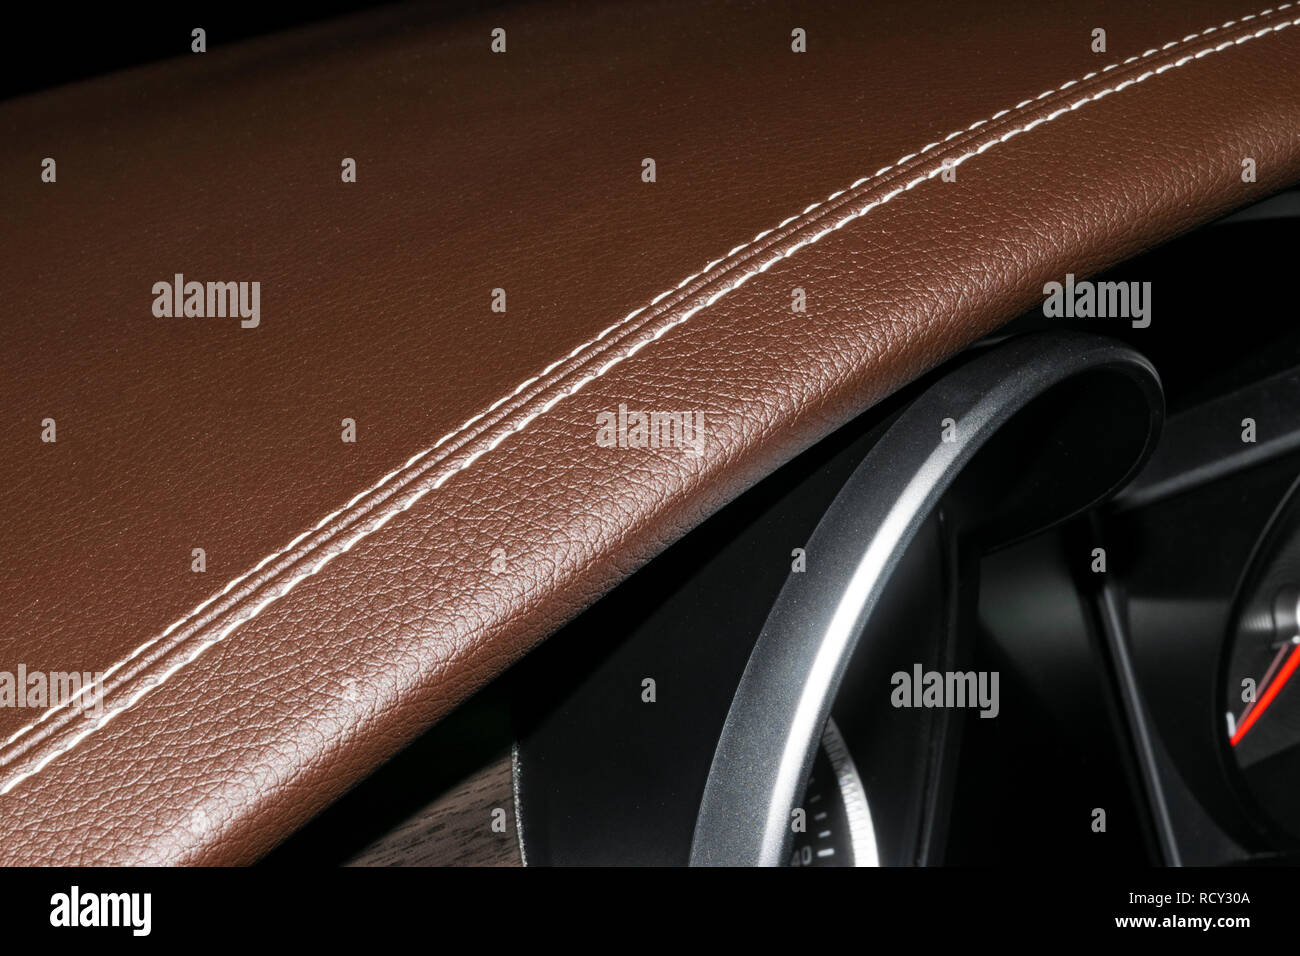 Modern sport car brown leather interior. Part of leather car cockpit details with stitching. Car detailing. Brown perforated leather cockpit. Stock Photo